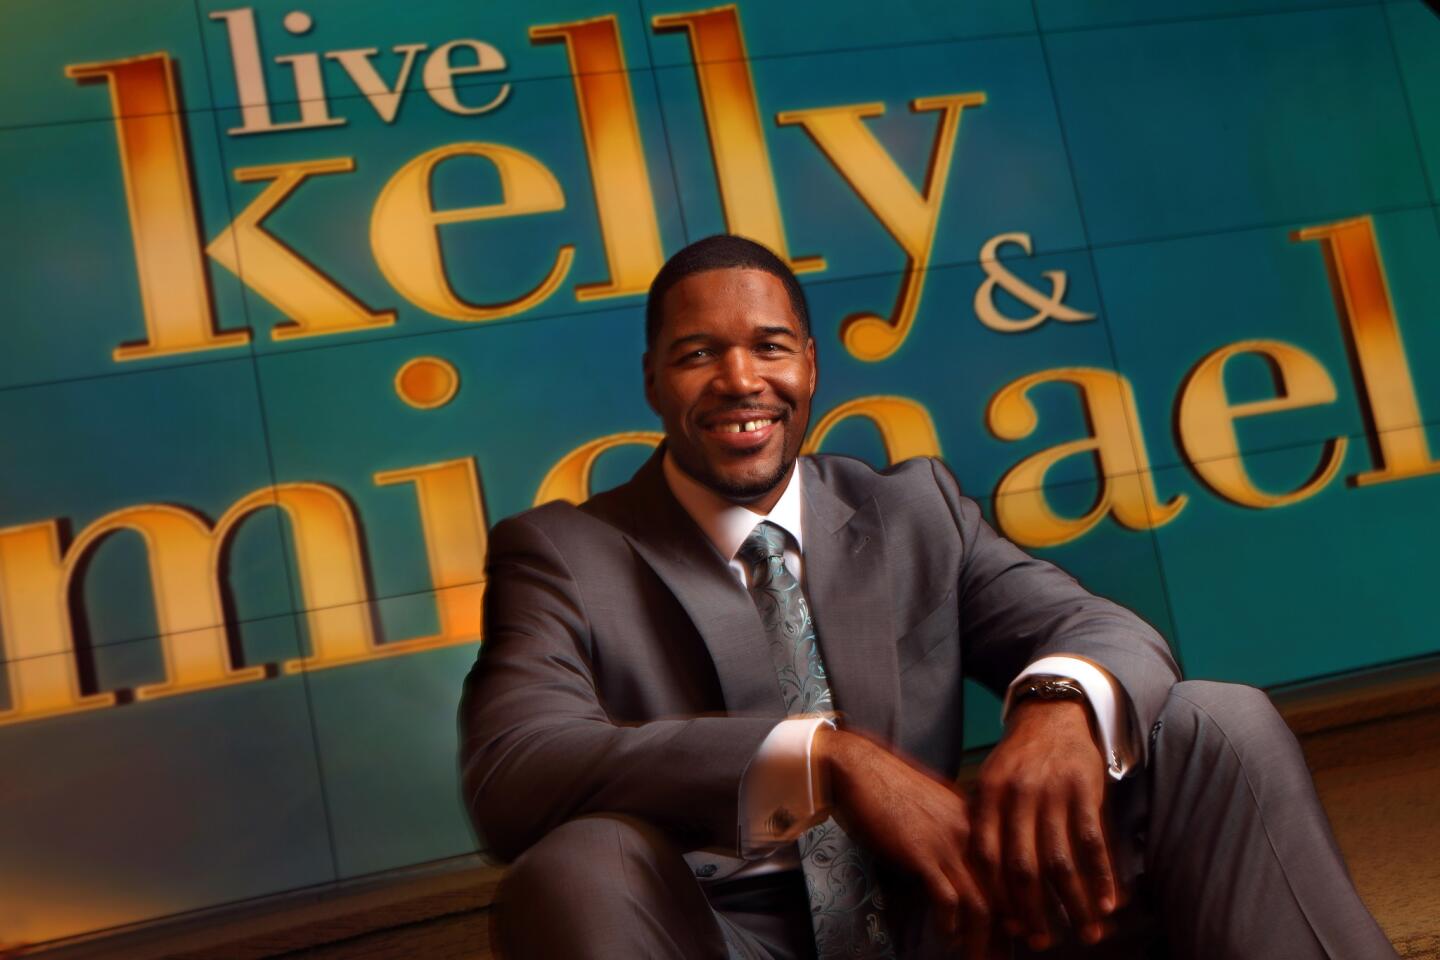 Michael Strahan, a former NFL defensive lineman and Super Bowl champion, is now the cohost of "Live," taking the place of the venerable Regis Philbin.